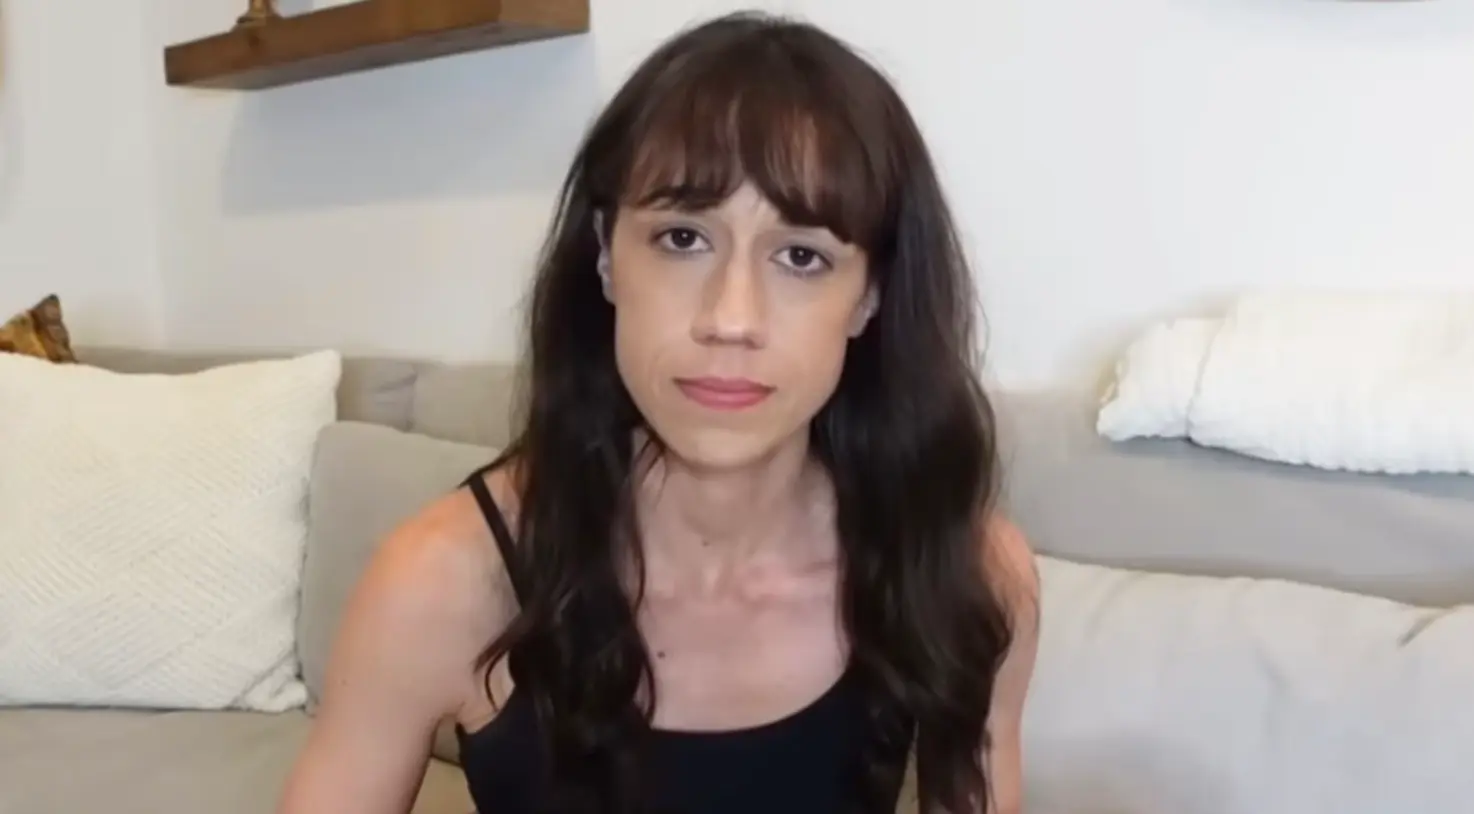 Colleen in a still from her recent apology video. (Credit: The US Sun)